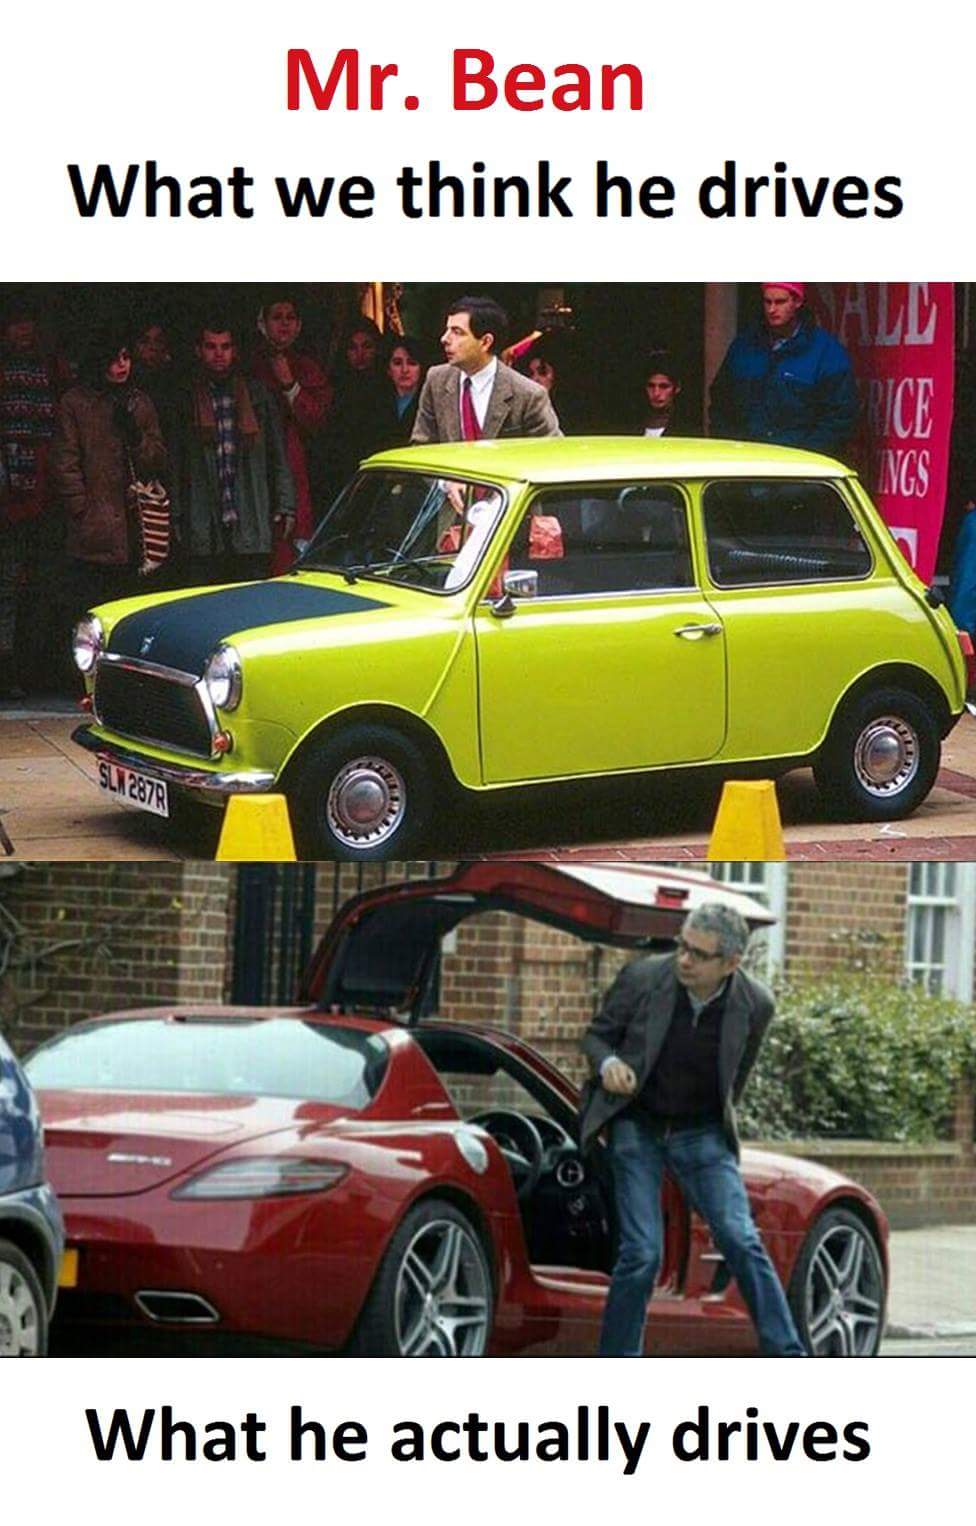 we think mr bean drives - Mr. Bean What we think he drives SL12871 What he actually drives